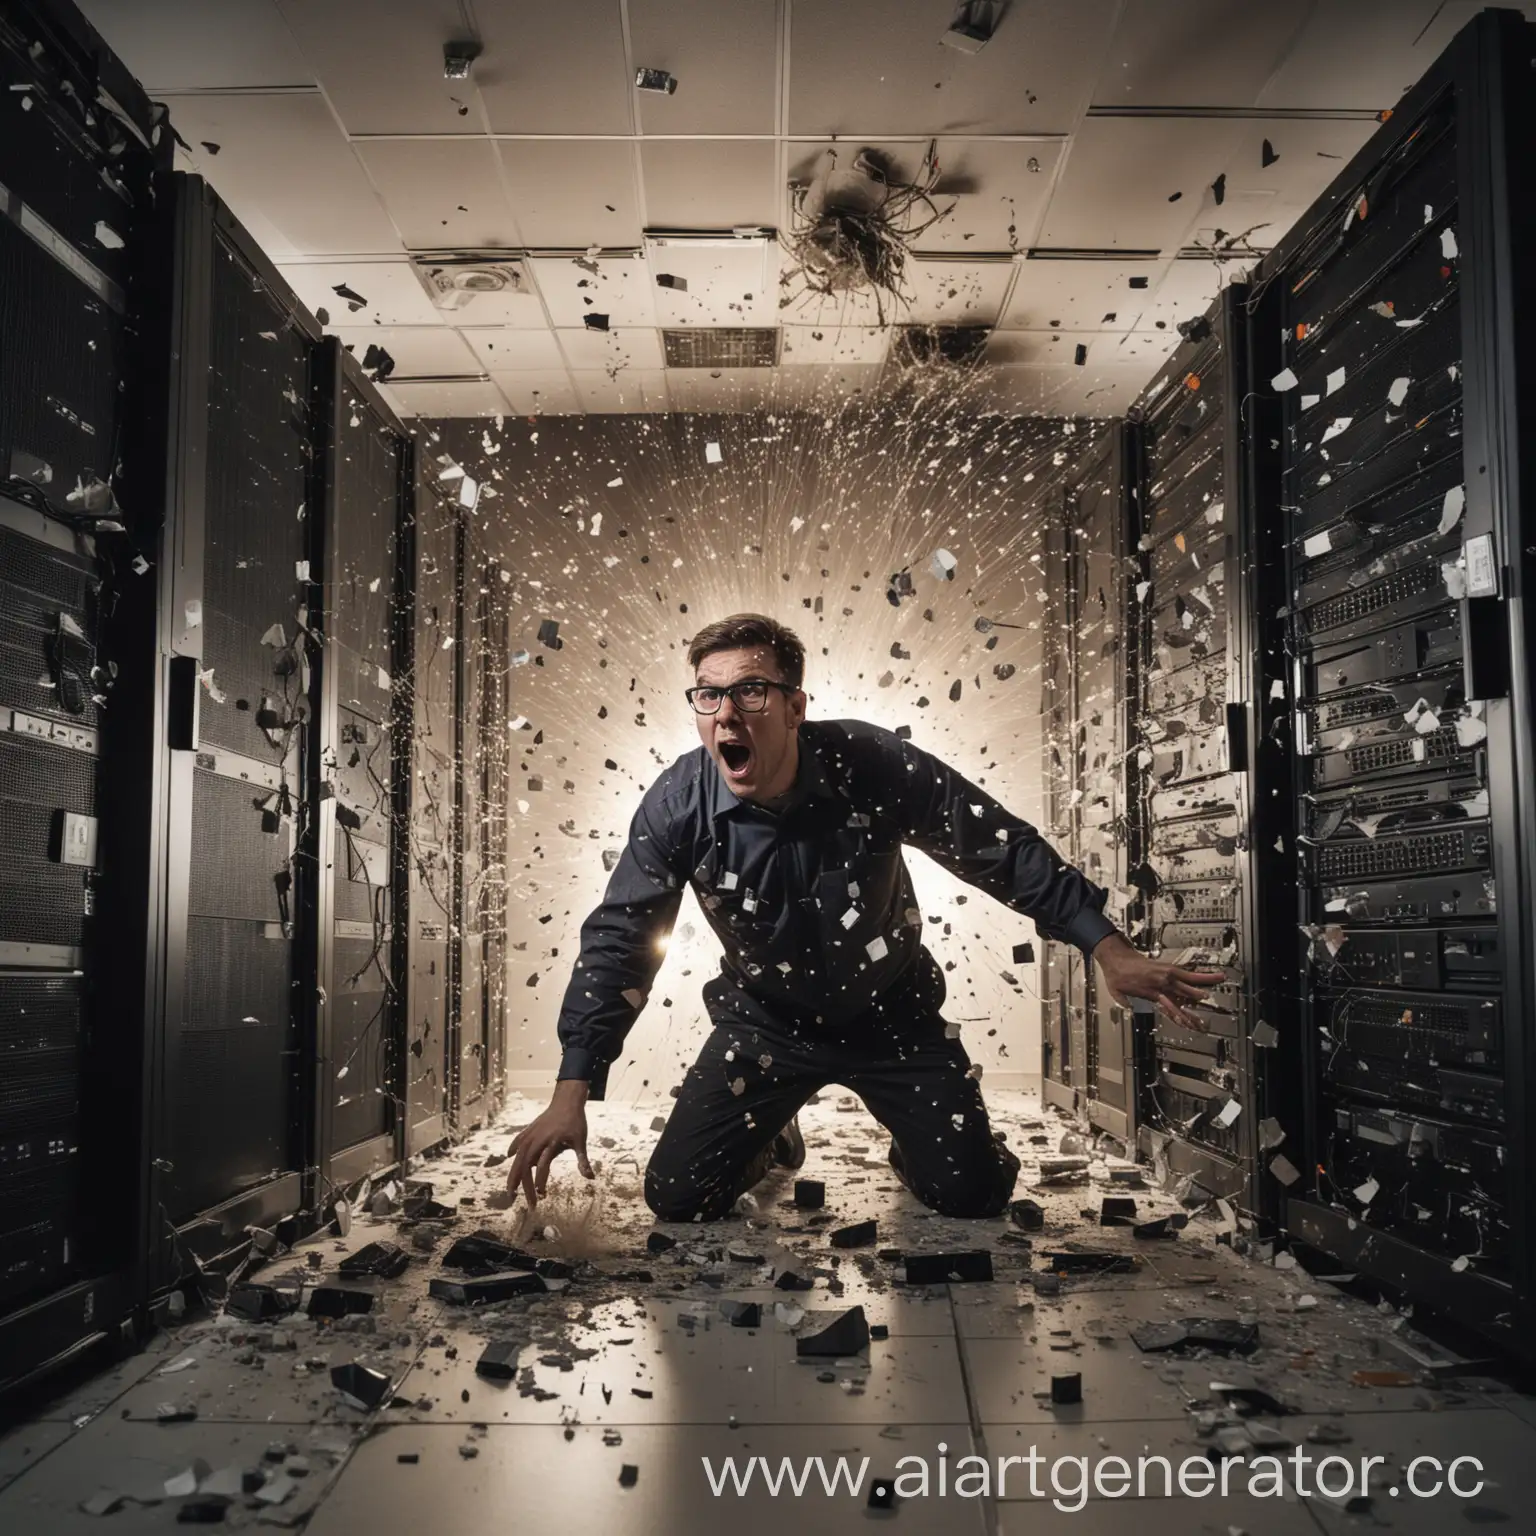 System-Administrator-Amidst-Server-Room-Chaos-and-Explosions